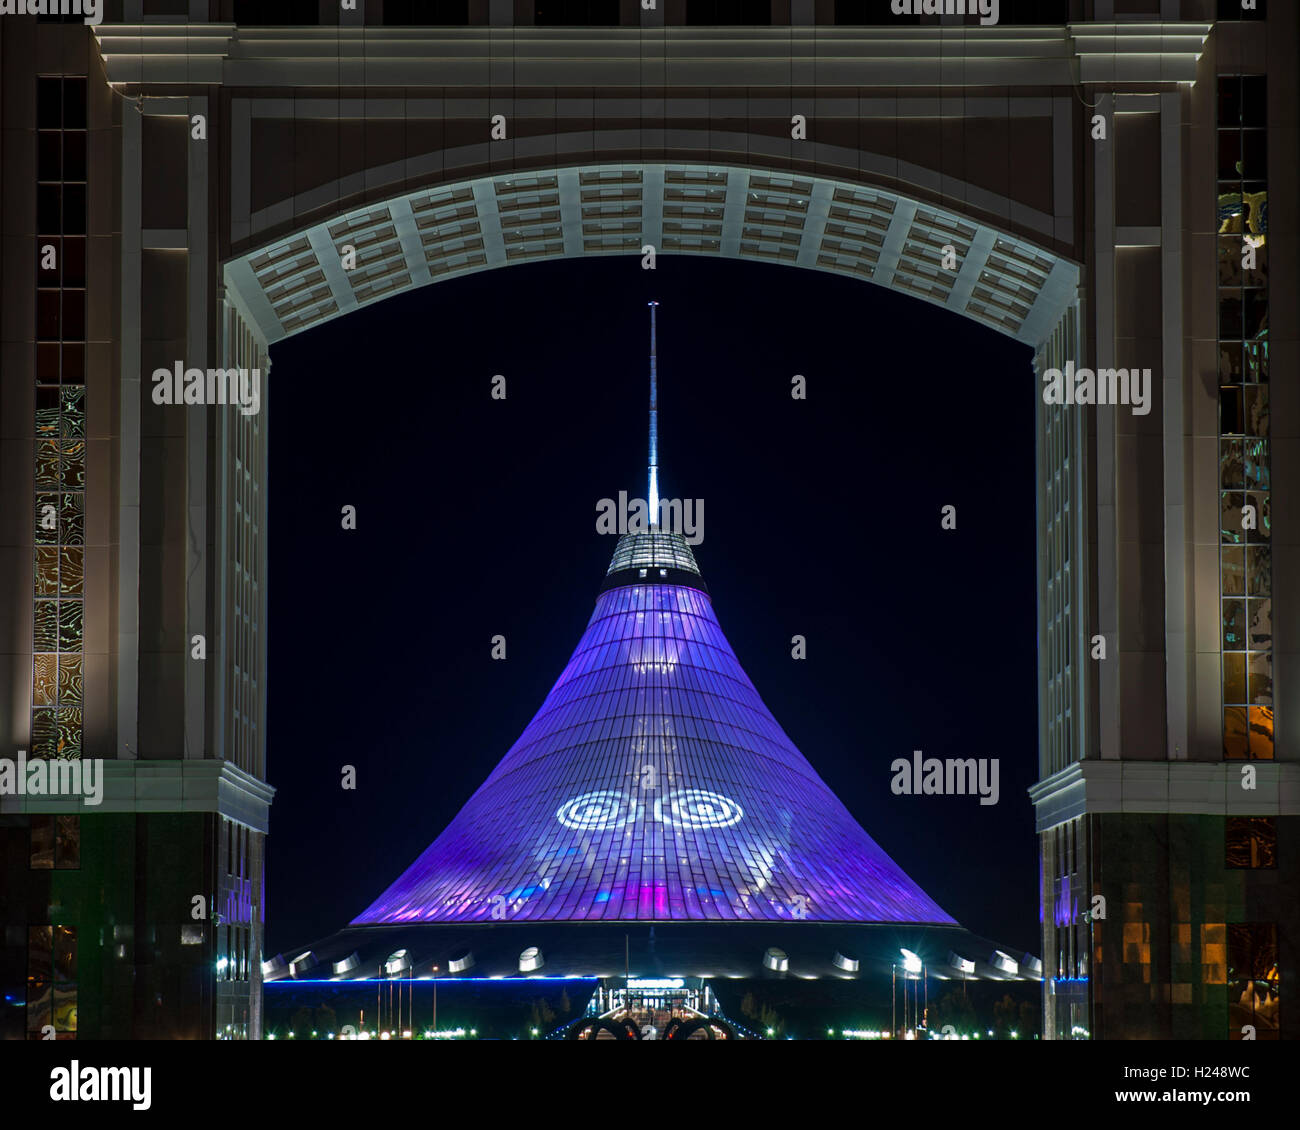 Khan Shatyr Entertainment and Shopping Center, which is a landmark in Astana - Kazakhstan, is the highest tensile structure in the world. Stock Photo